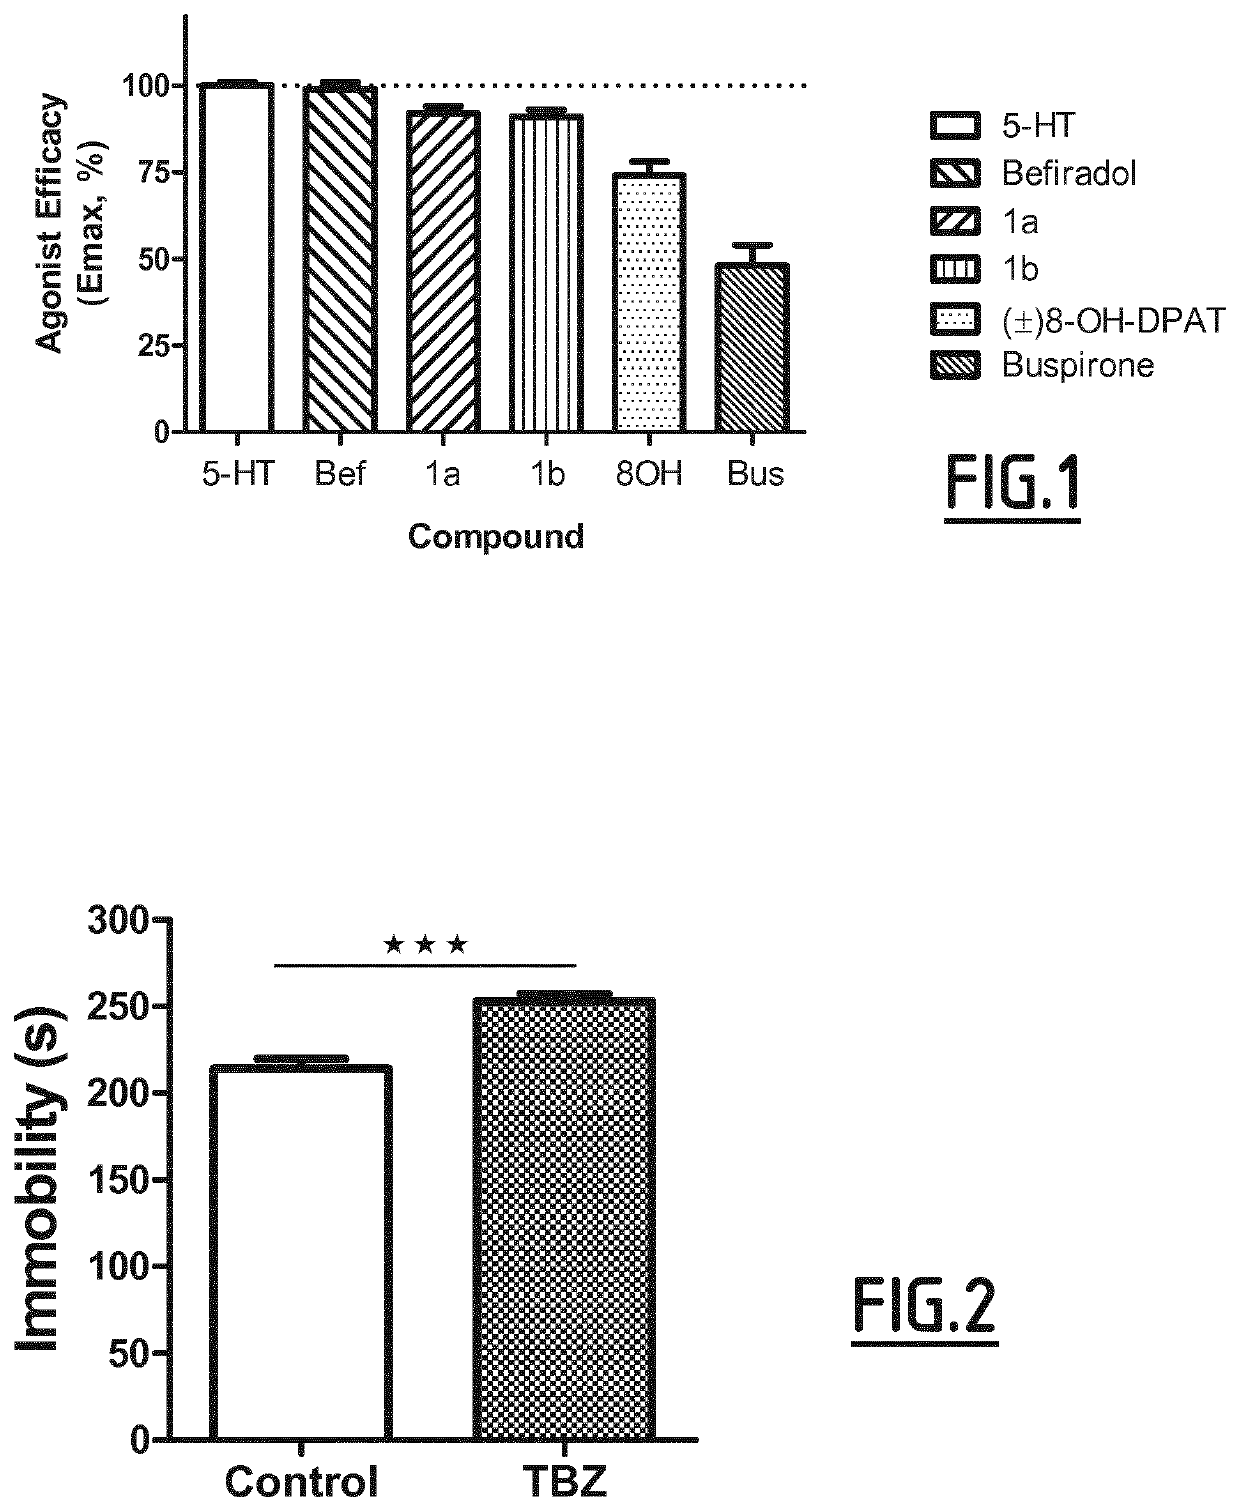 Use Of Selective Serotonin 5-HT1A Receptor Agonists For Treating Side-Effects Of VMAT Inhibitors